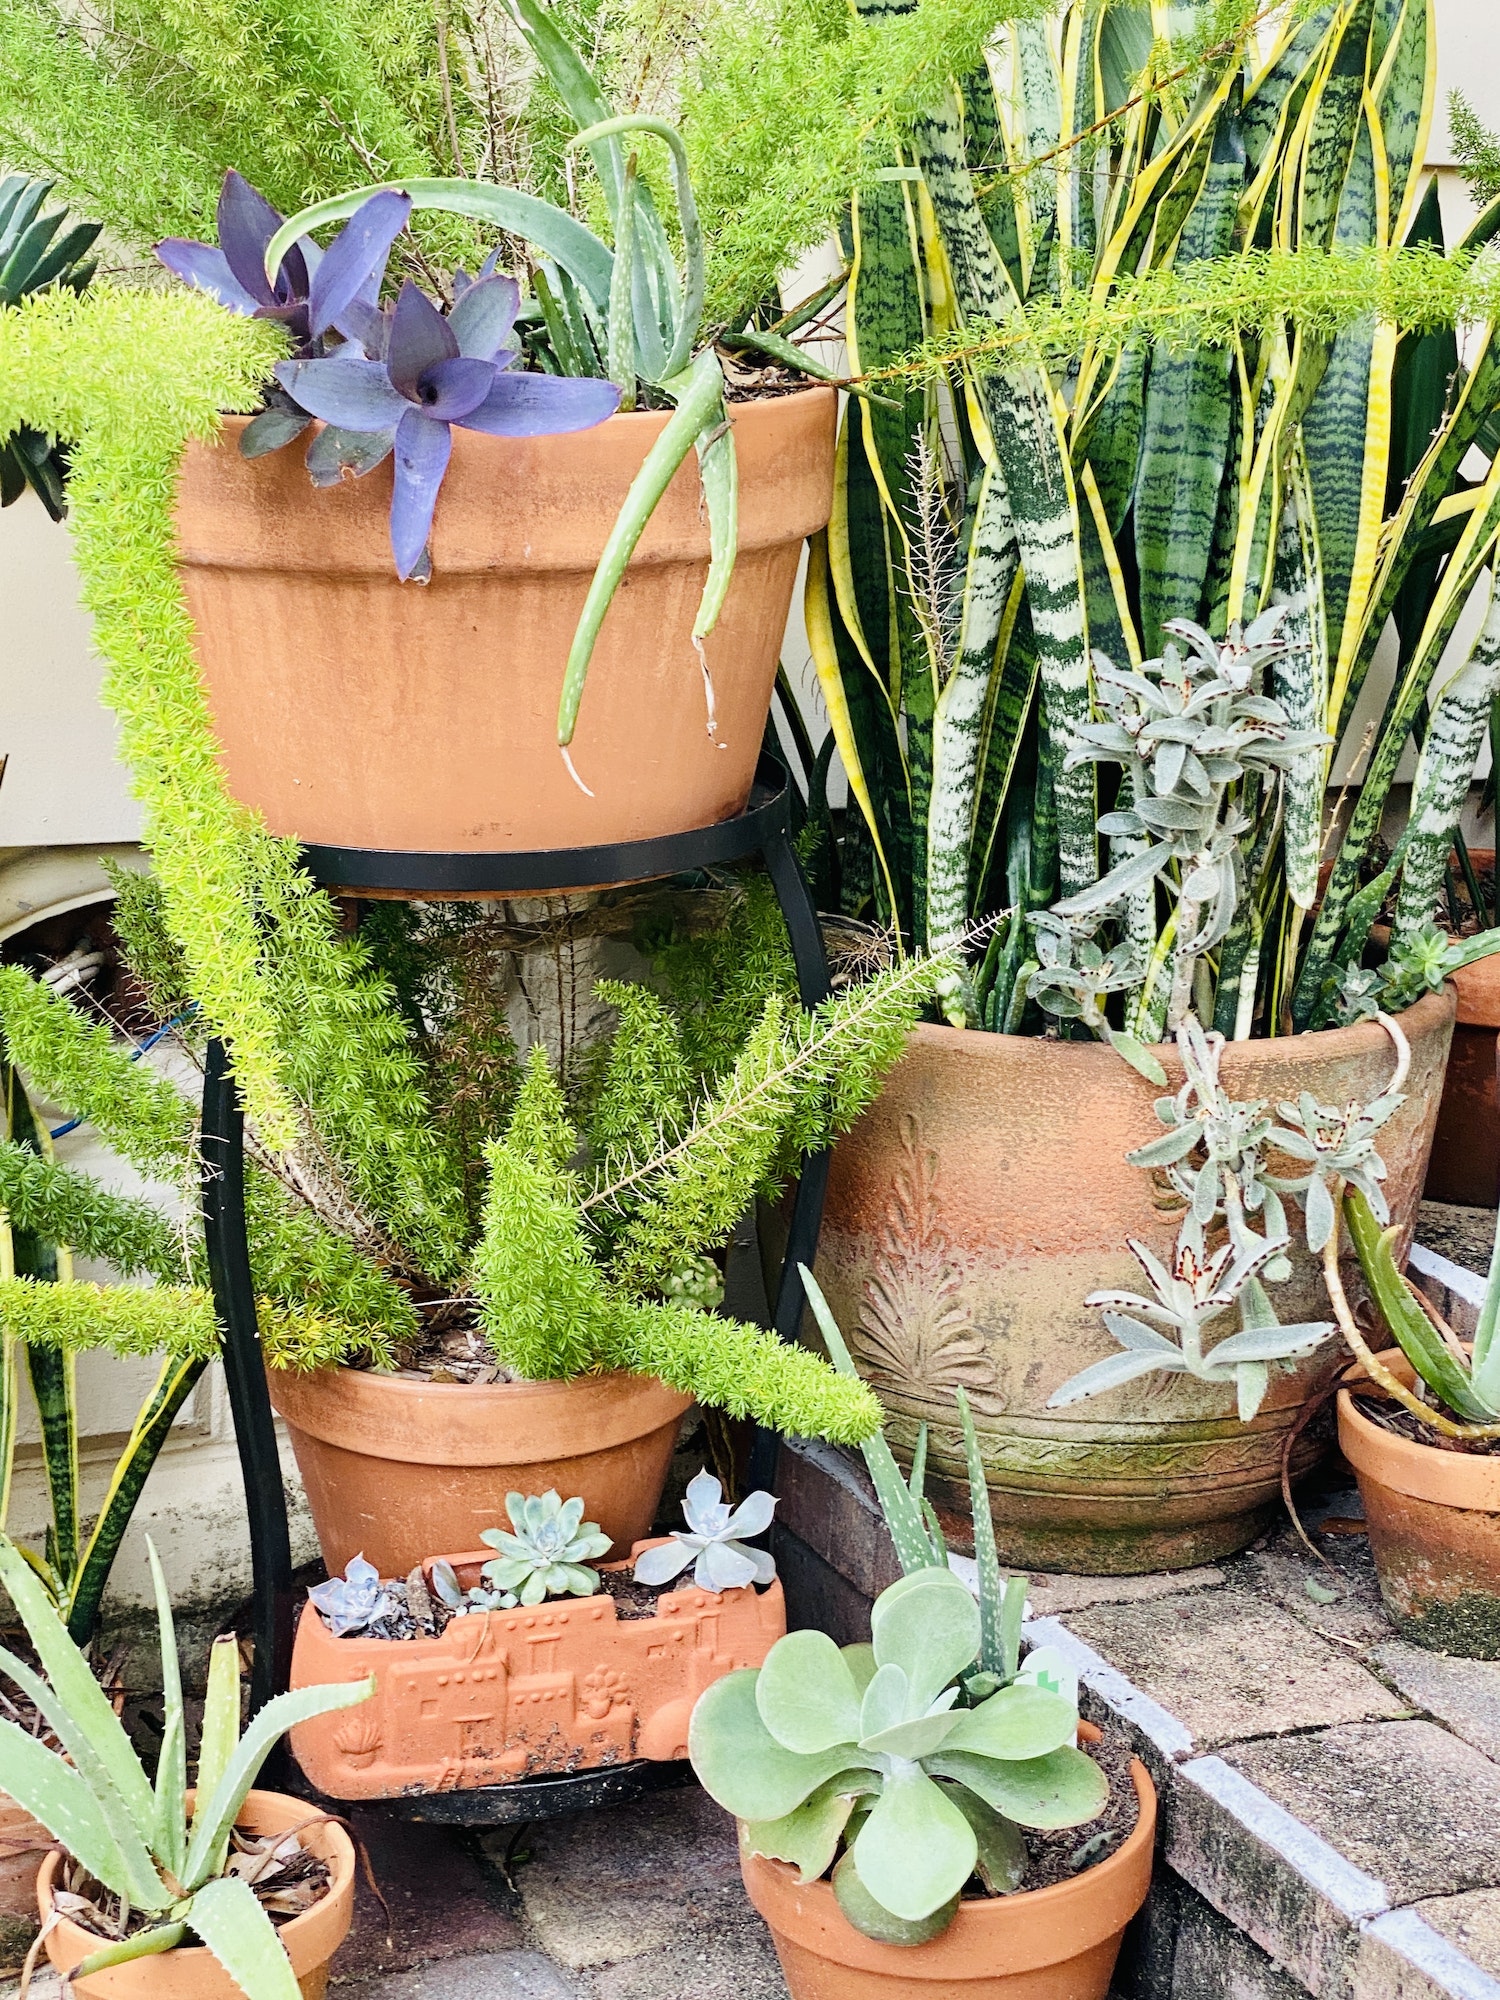 Terracotta potted plants on plant stands in backyard